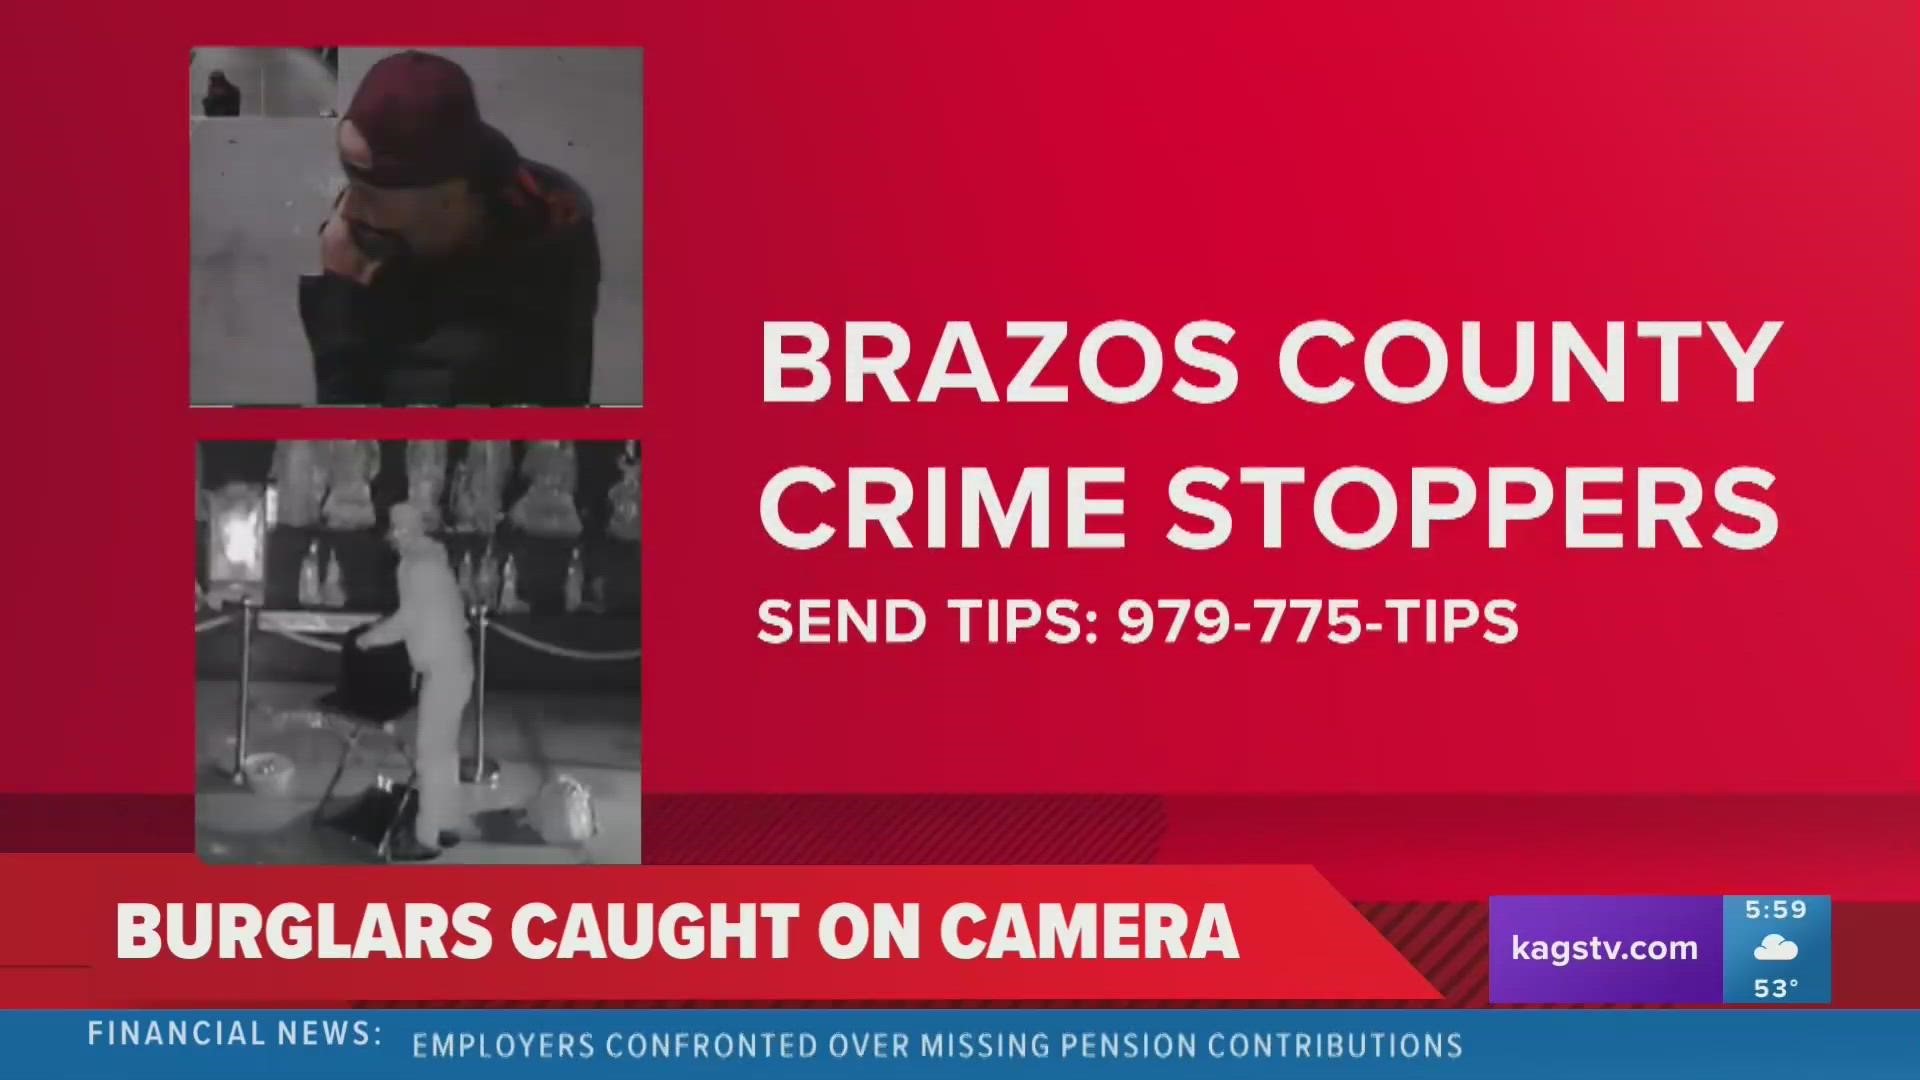 According to Crime Stoppers, the two stole a safe and a donation box from the Hindu Society of the Brazos Valley containing thousands of dollars on Jan. 11.